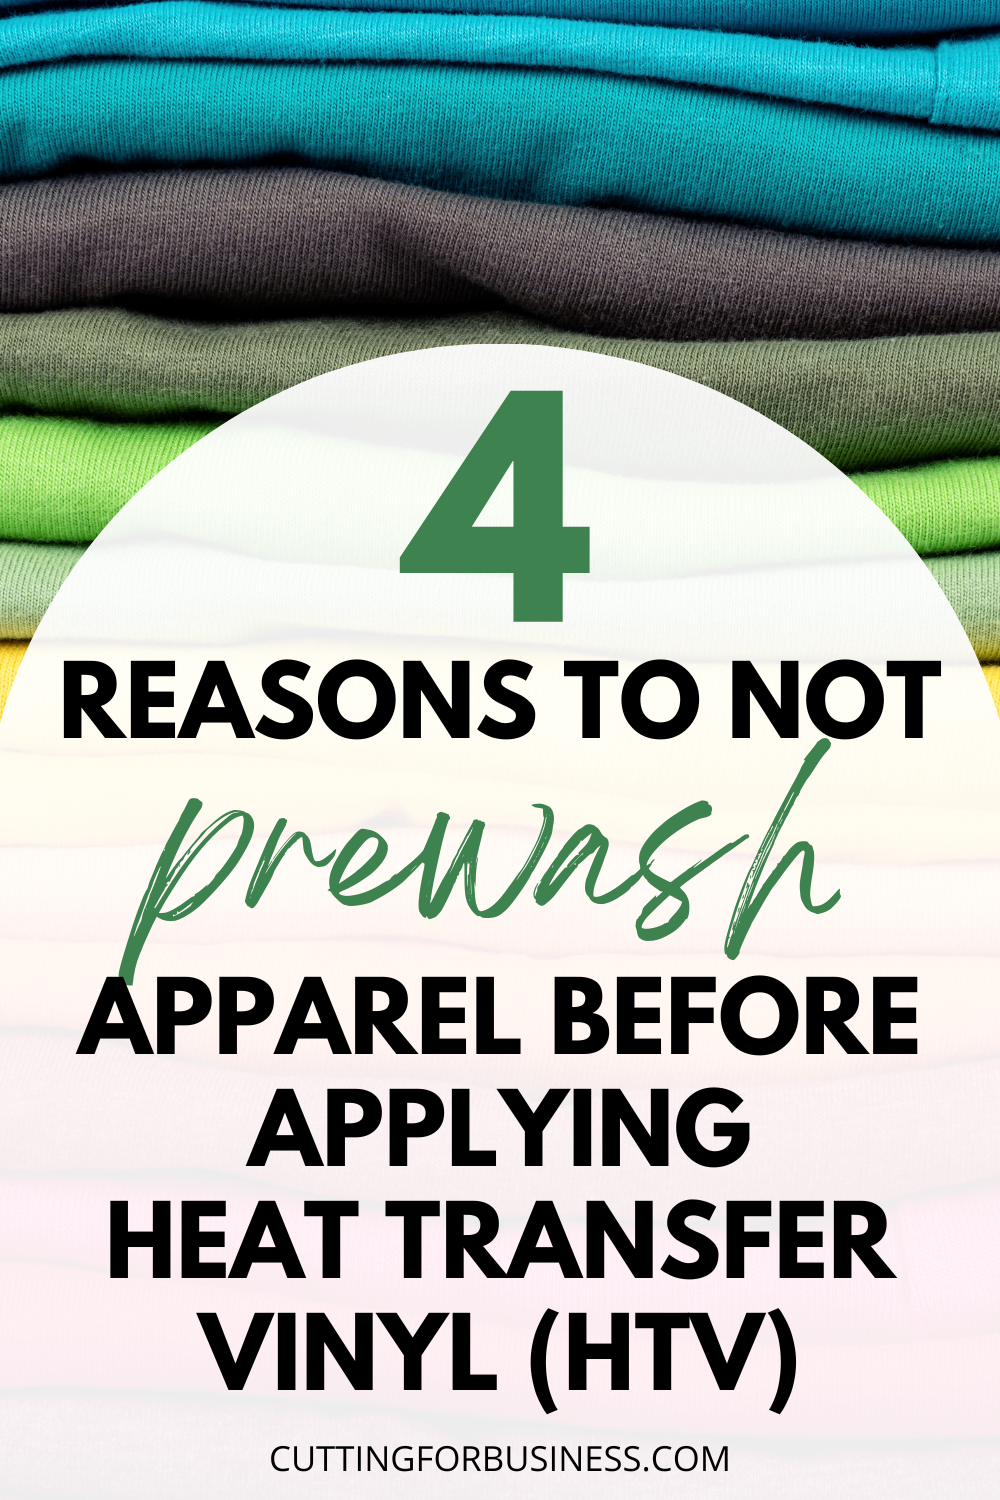 4 Reasons to Not Prewash Apparel Before Applying Heat Transfer Vinyl (HTV) in Your Craft Business - cuttingforbusiness.com.